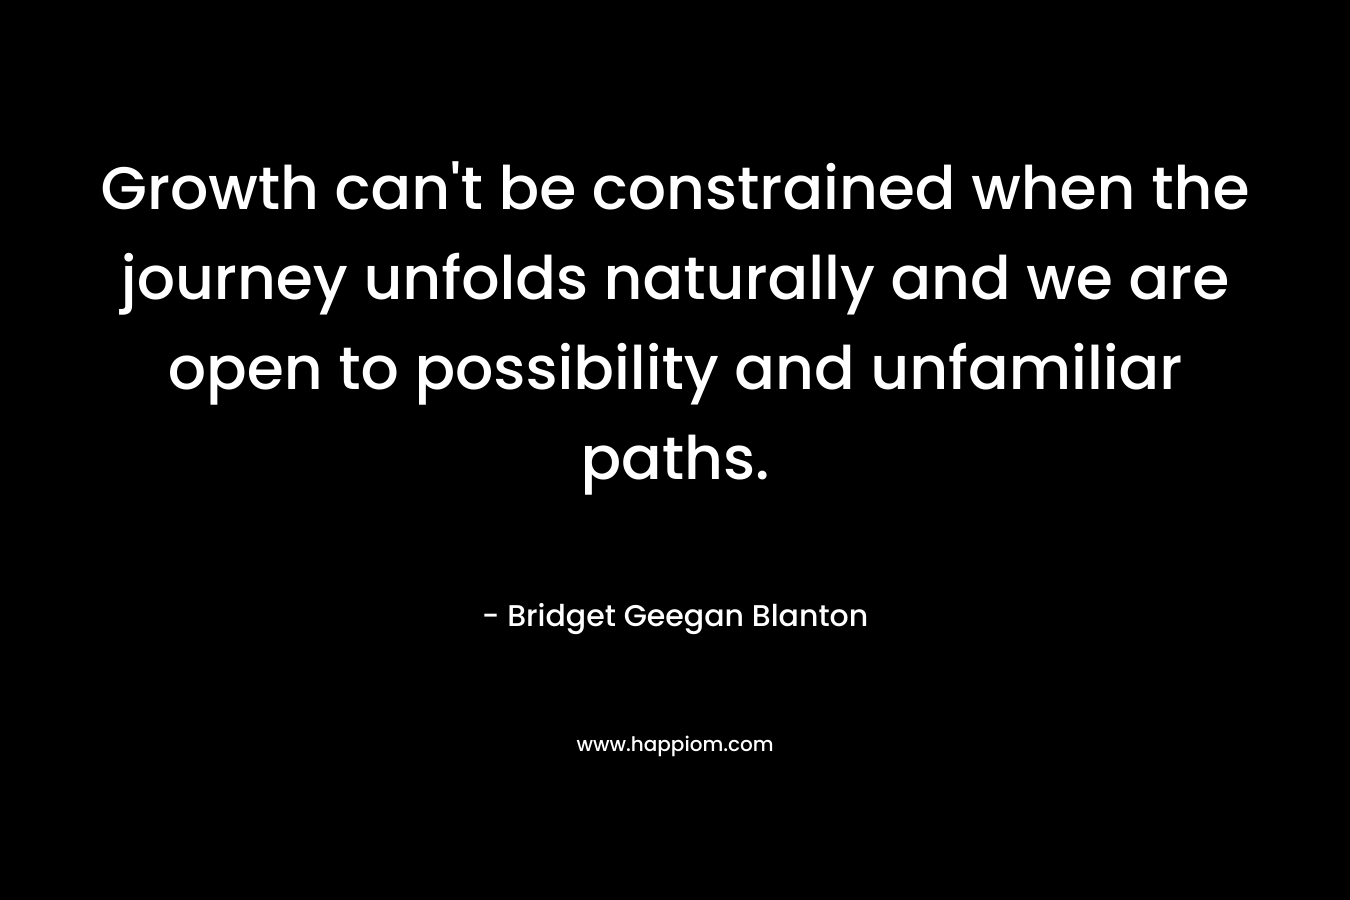 Growth can’t be constrained when the journey unfolds naturally and we are open to possibility and unfamiliar paths. – Bridget Geegan Blanton